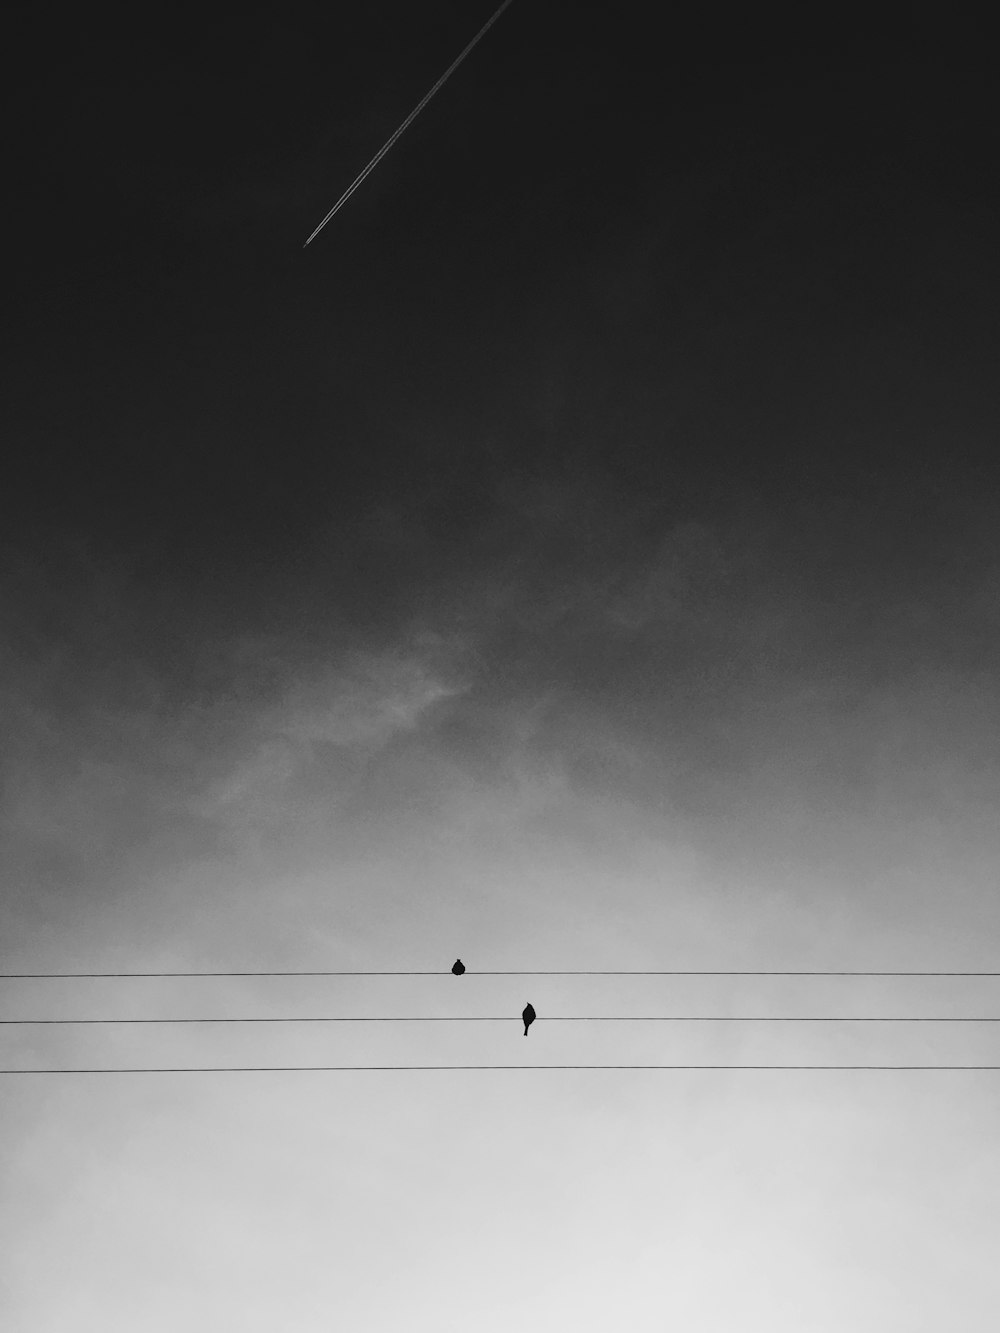 1000+ Black And White Sky Pictures | Download Free Images on Unsplash